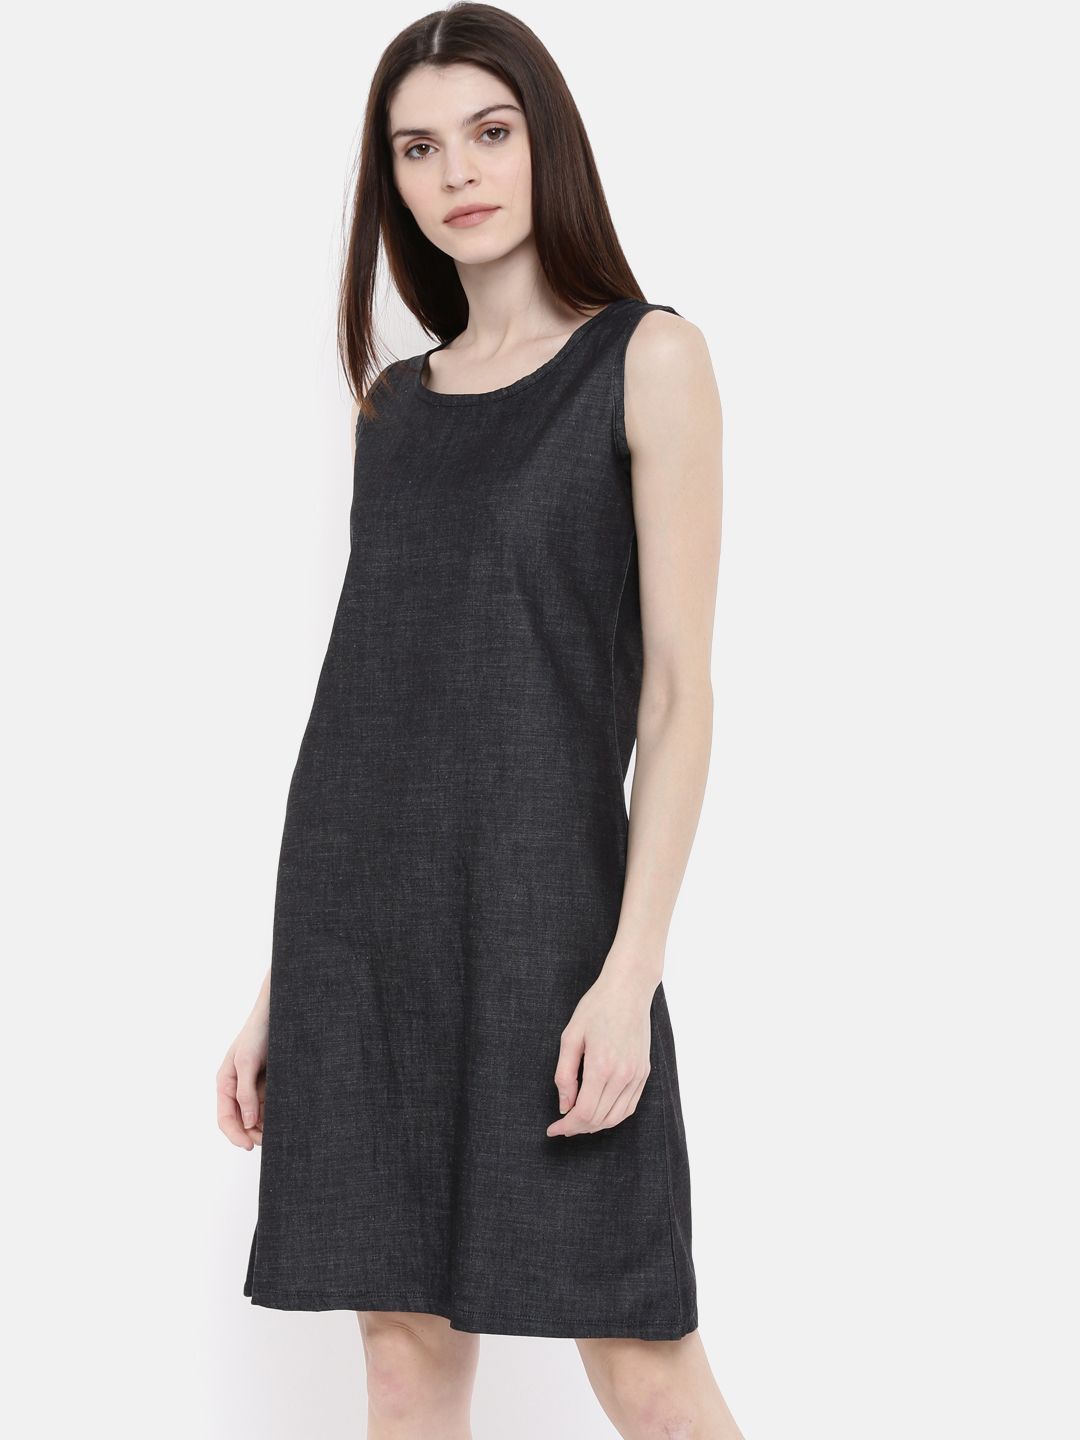 The Navy Solid A-Line WFH Chambray Dress